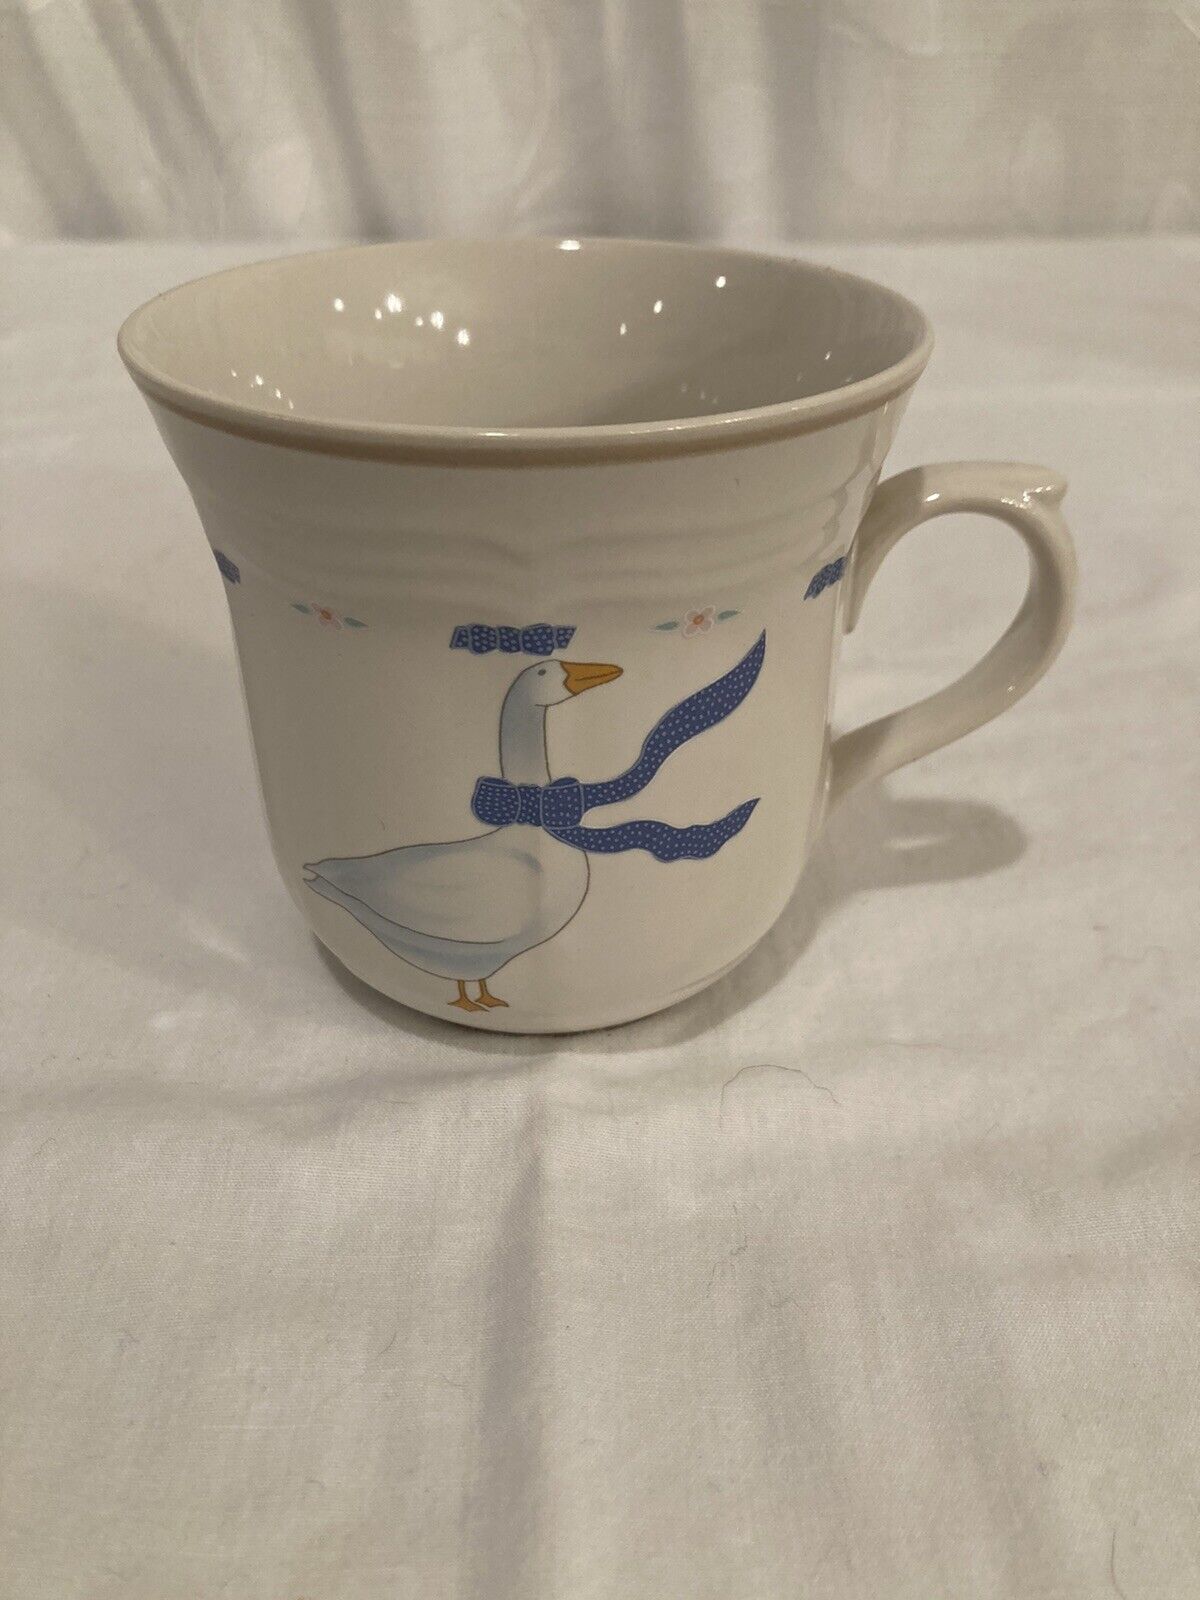 Newcor Stoneware Countryside Coffee Mug White Blue Geese Cup 1987 New